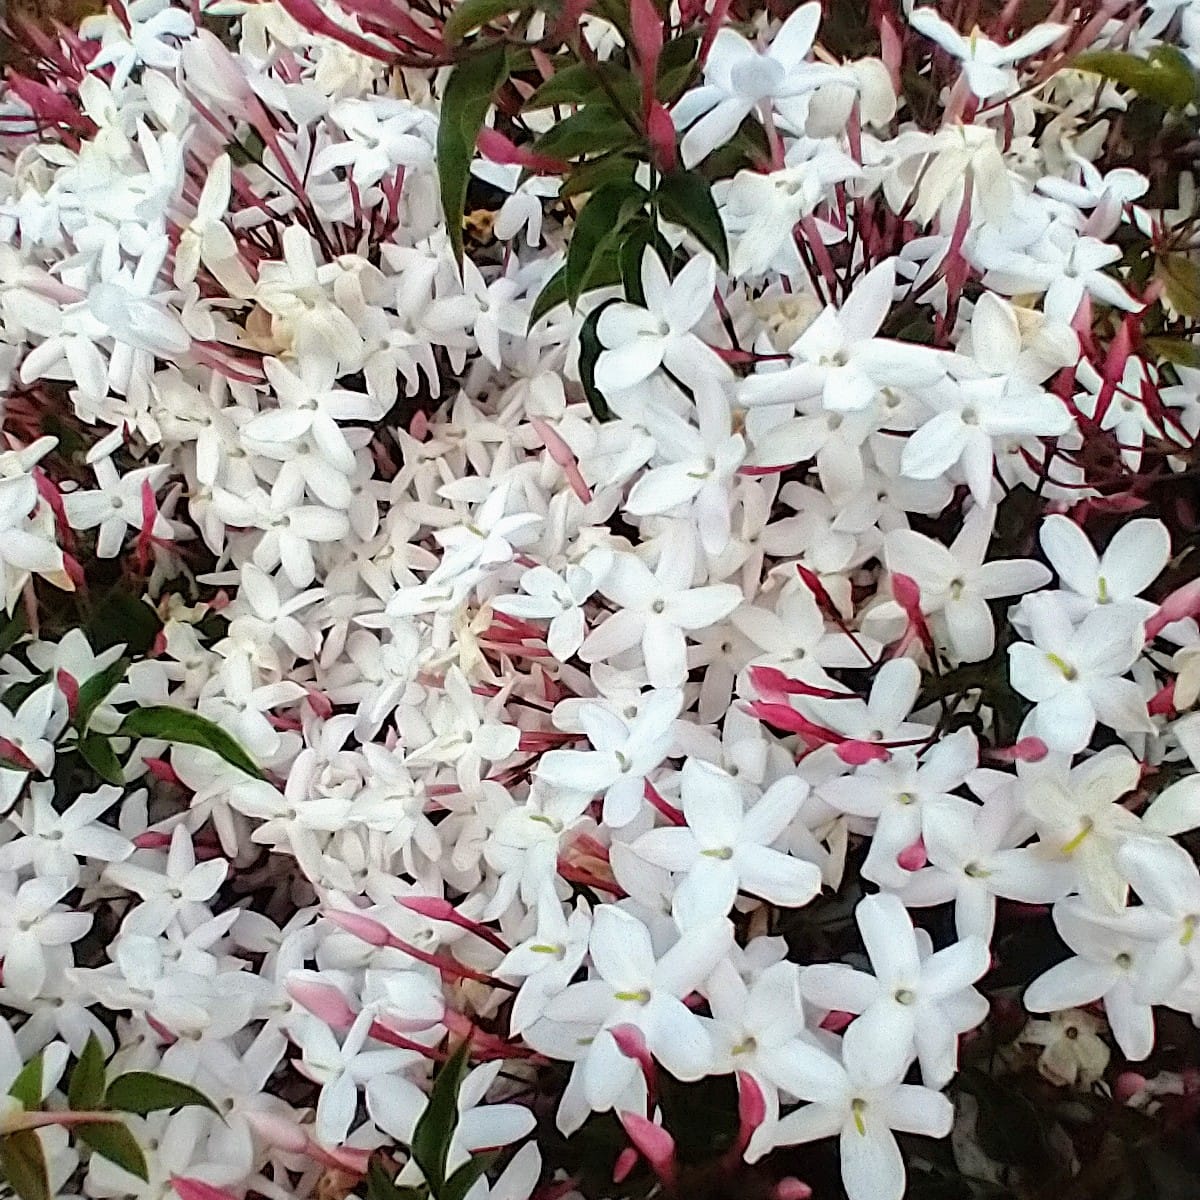 Close-up photo of a tumbling mass of white star jasmine flowers.